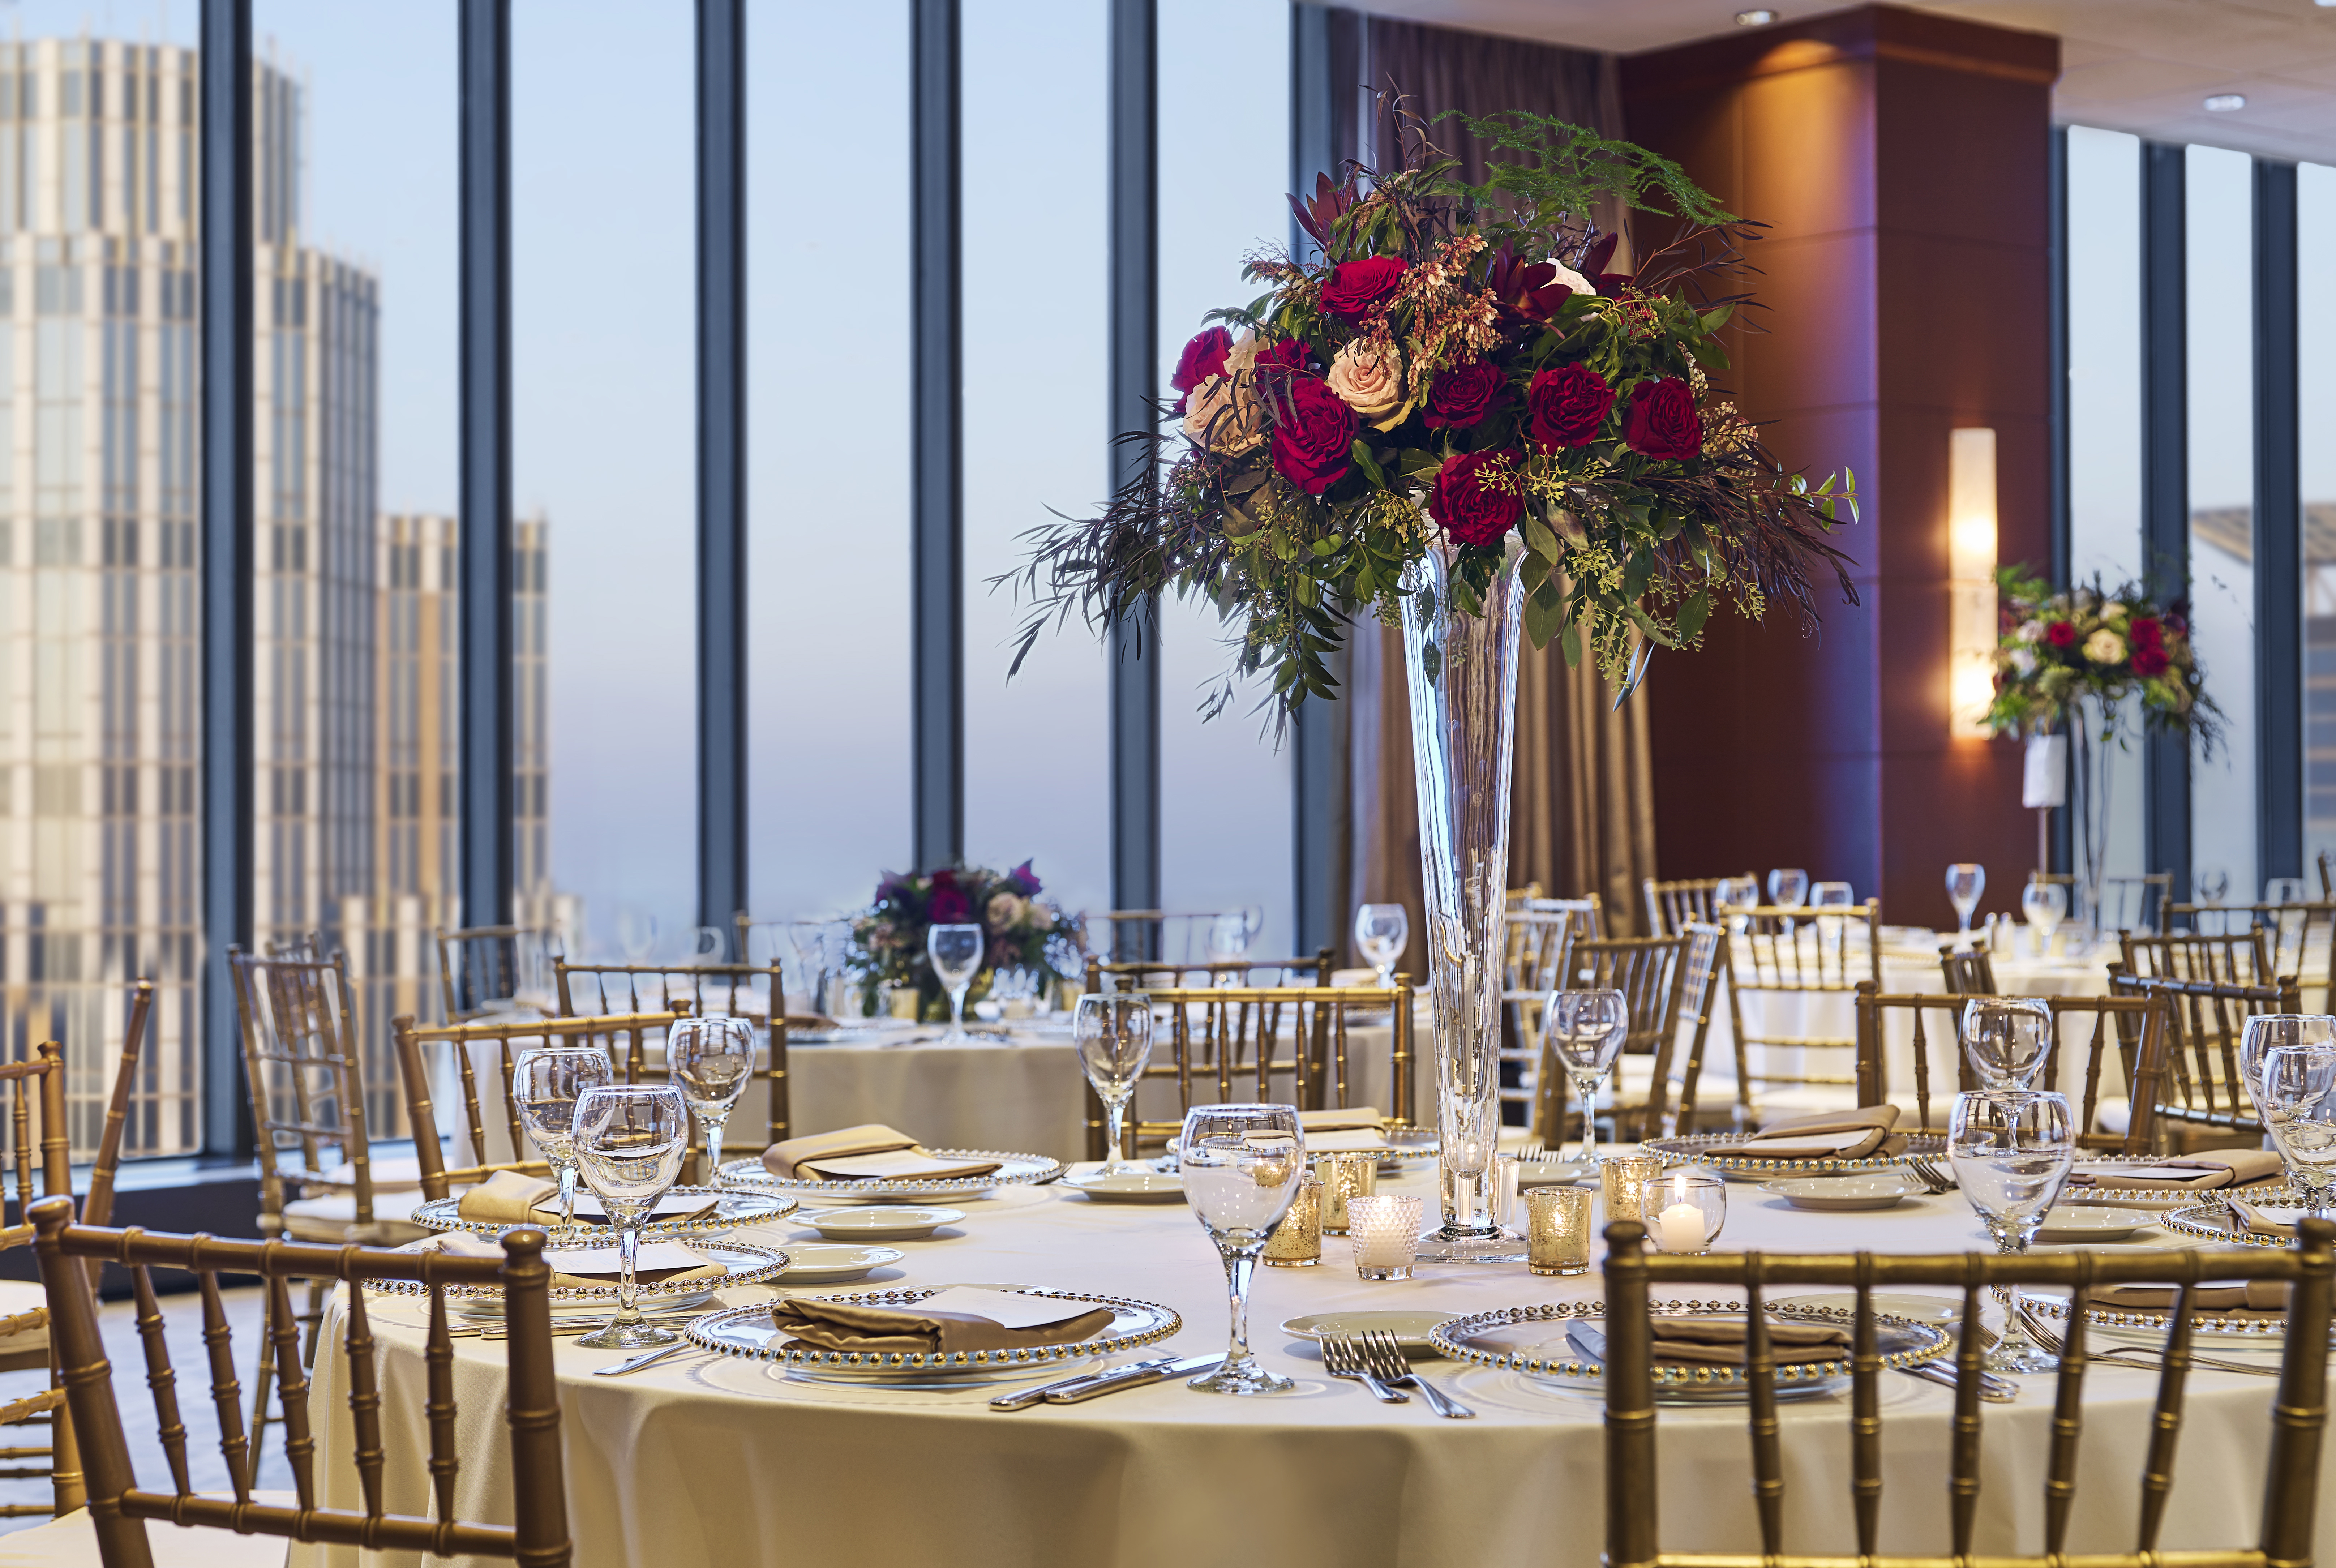 Ballroom Banquet Table with Outside View